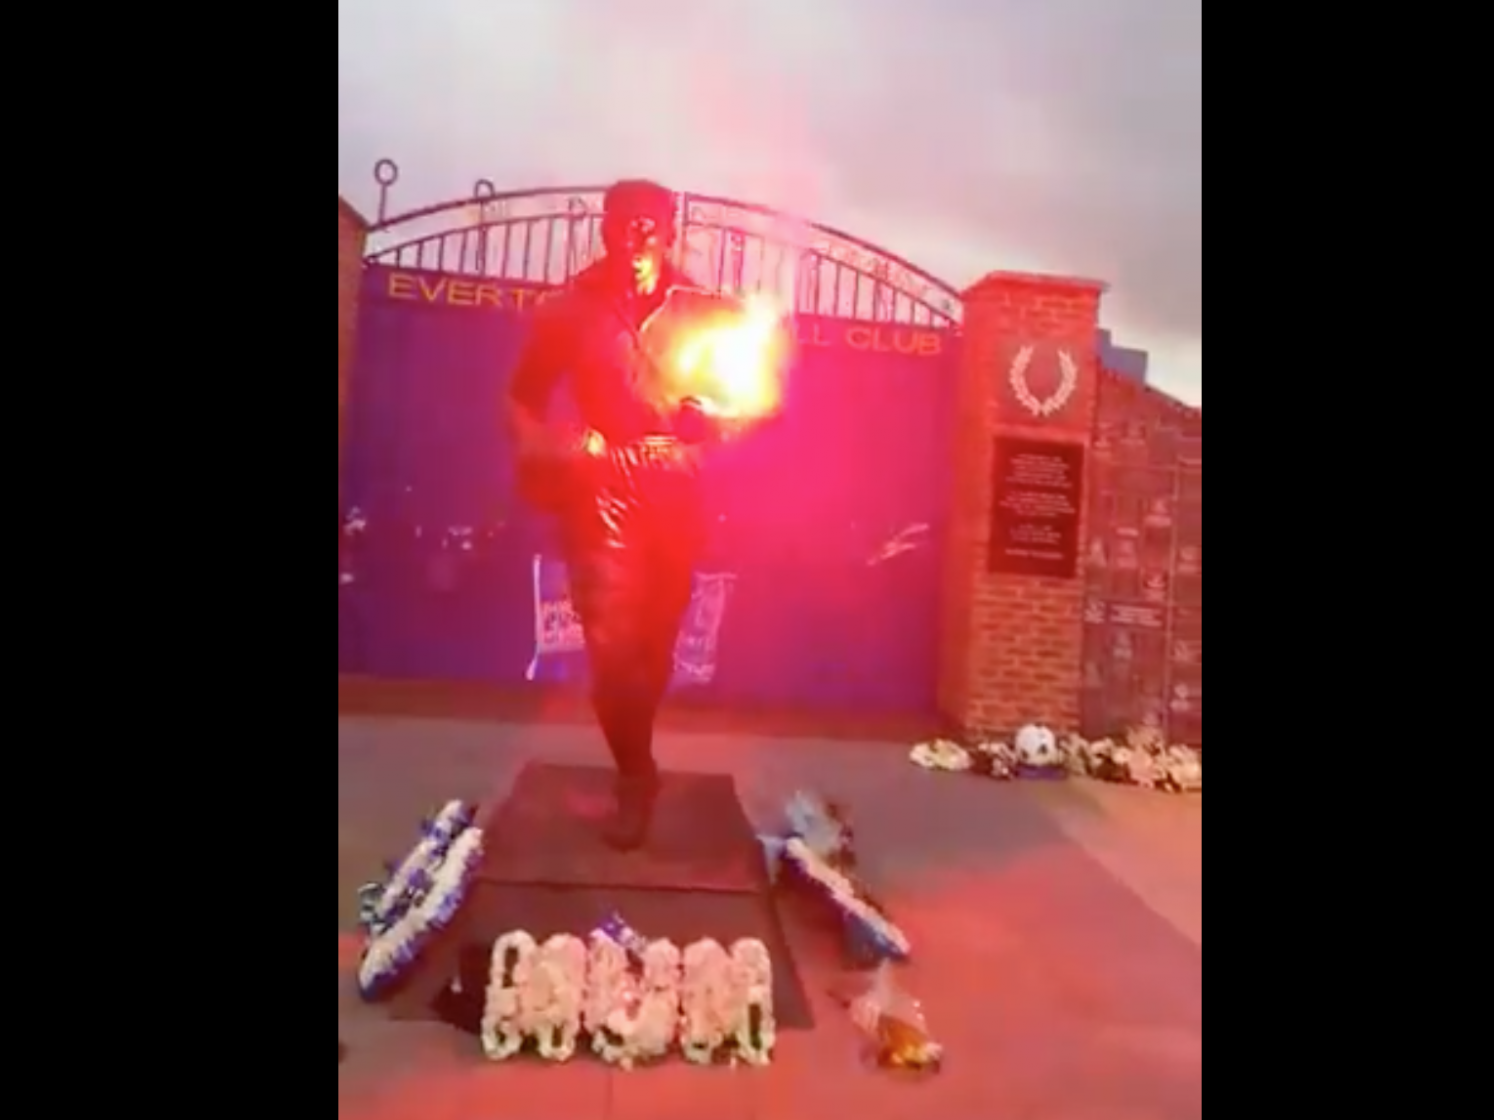 The Dixie Dean statue outside Goodison Park was set on fire